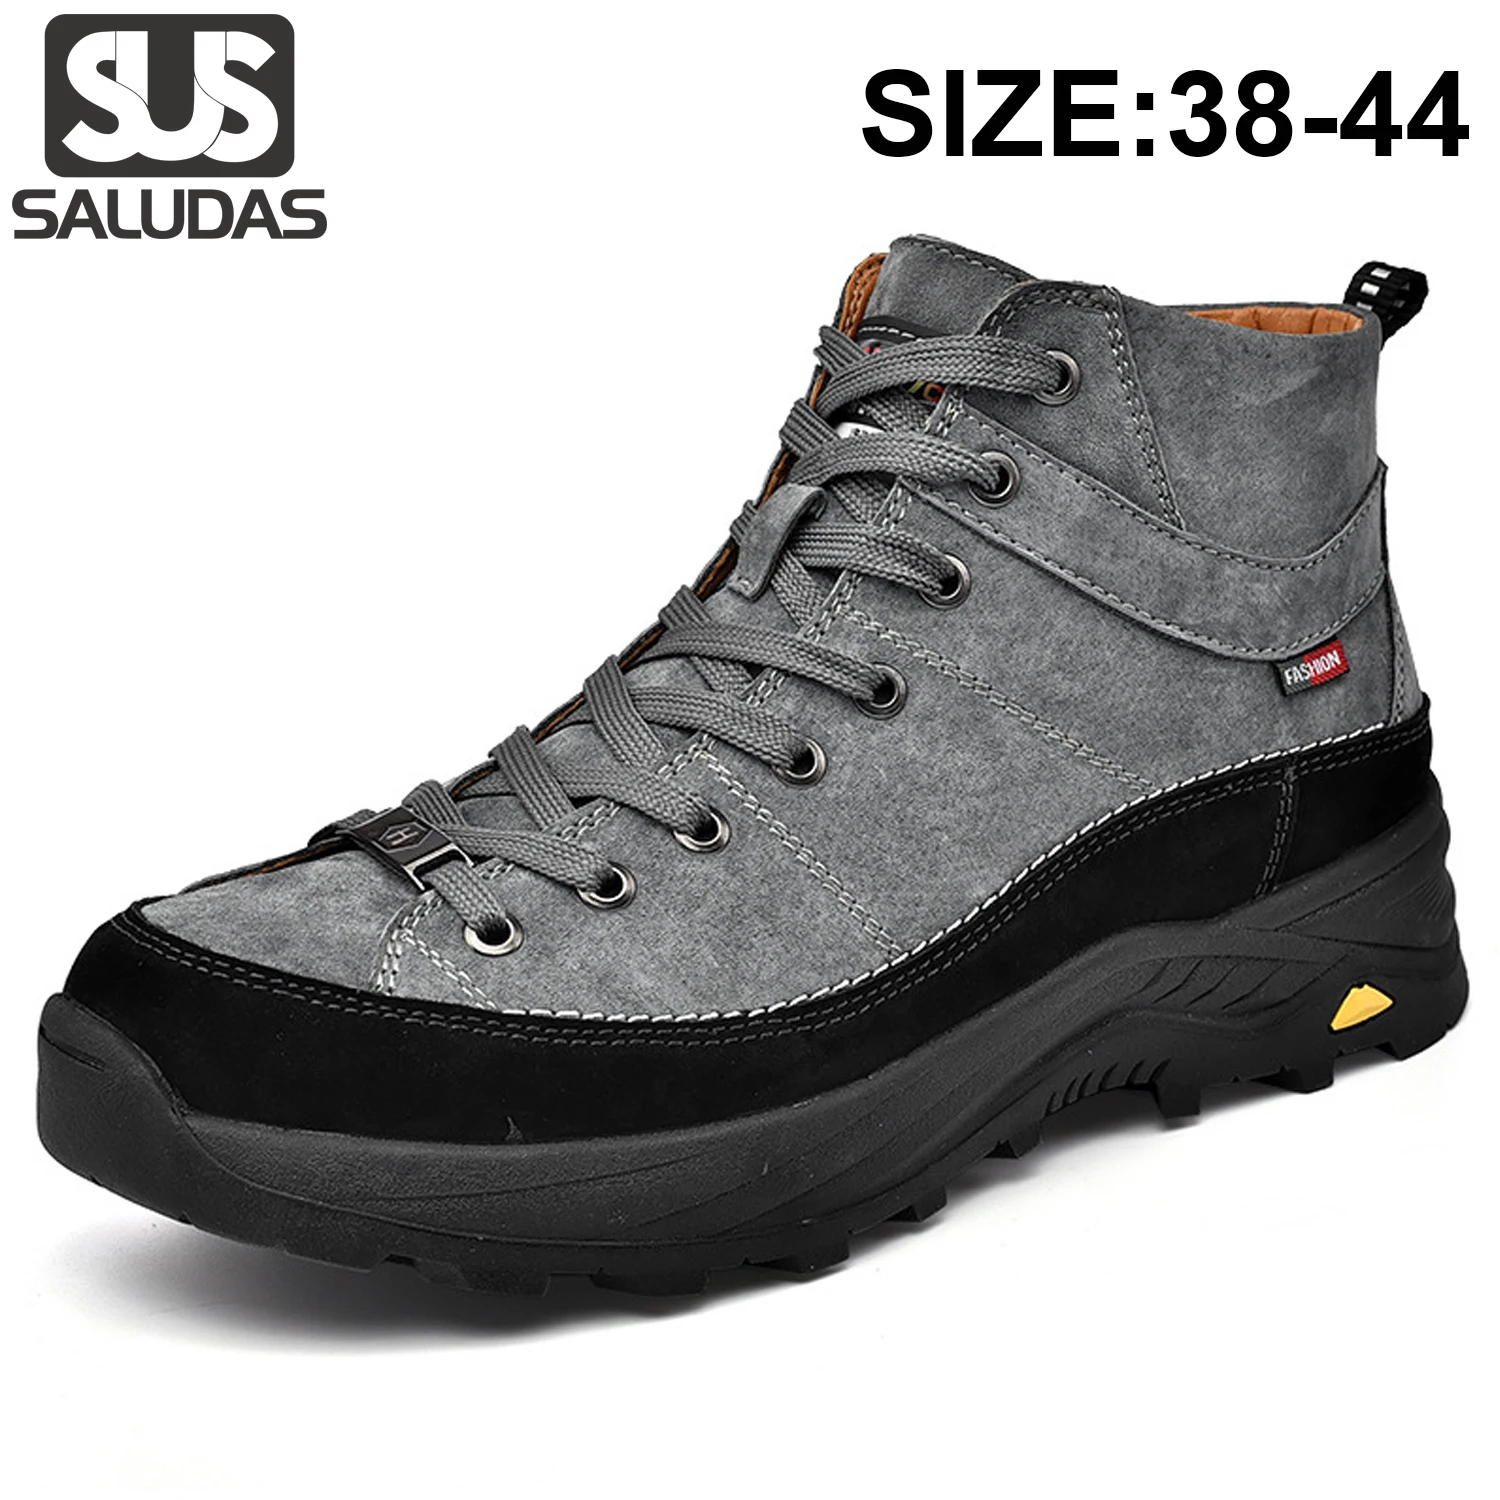 SALUDAS Men Leather Boots Outdoor Camping Travel Hiking Shoes Waterproof Winter Boots Fashion Luxury Casual Sneakers Male